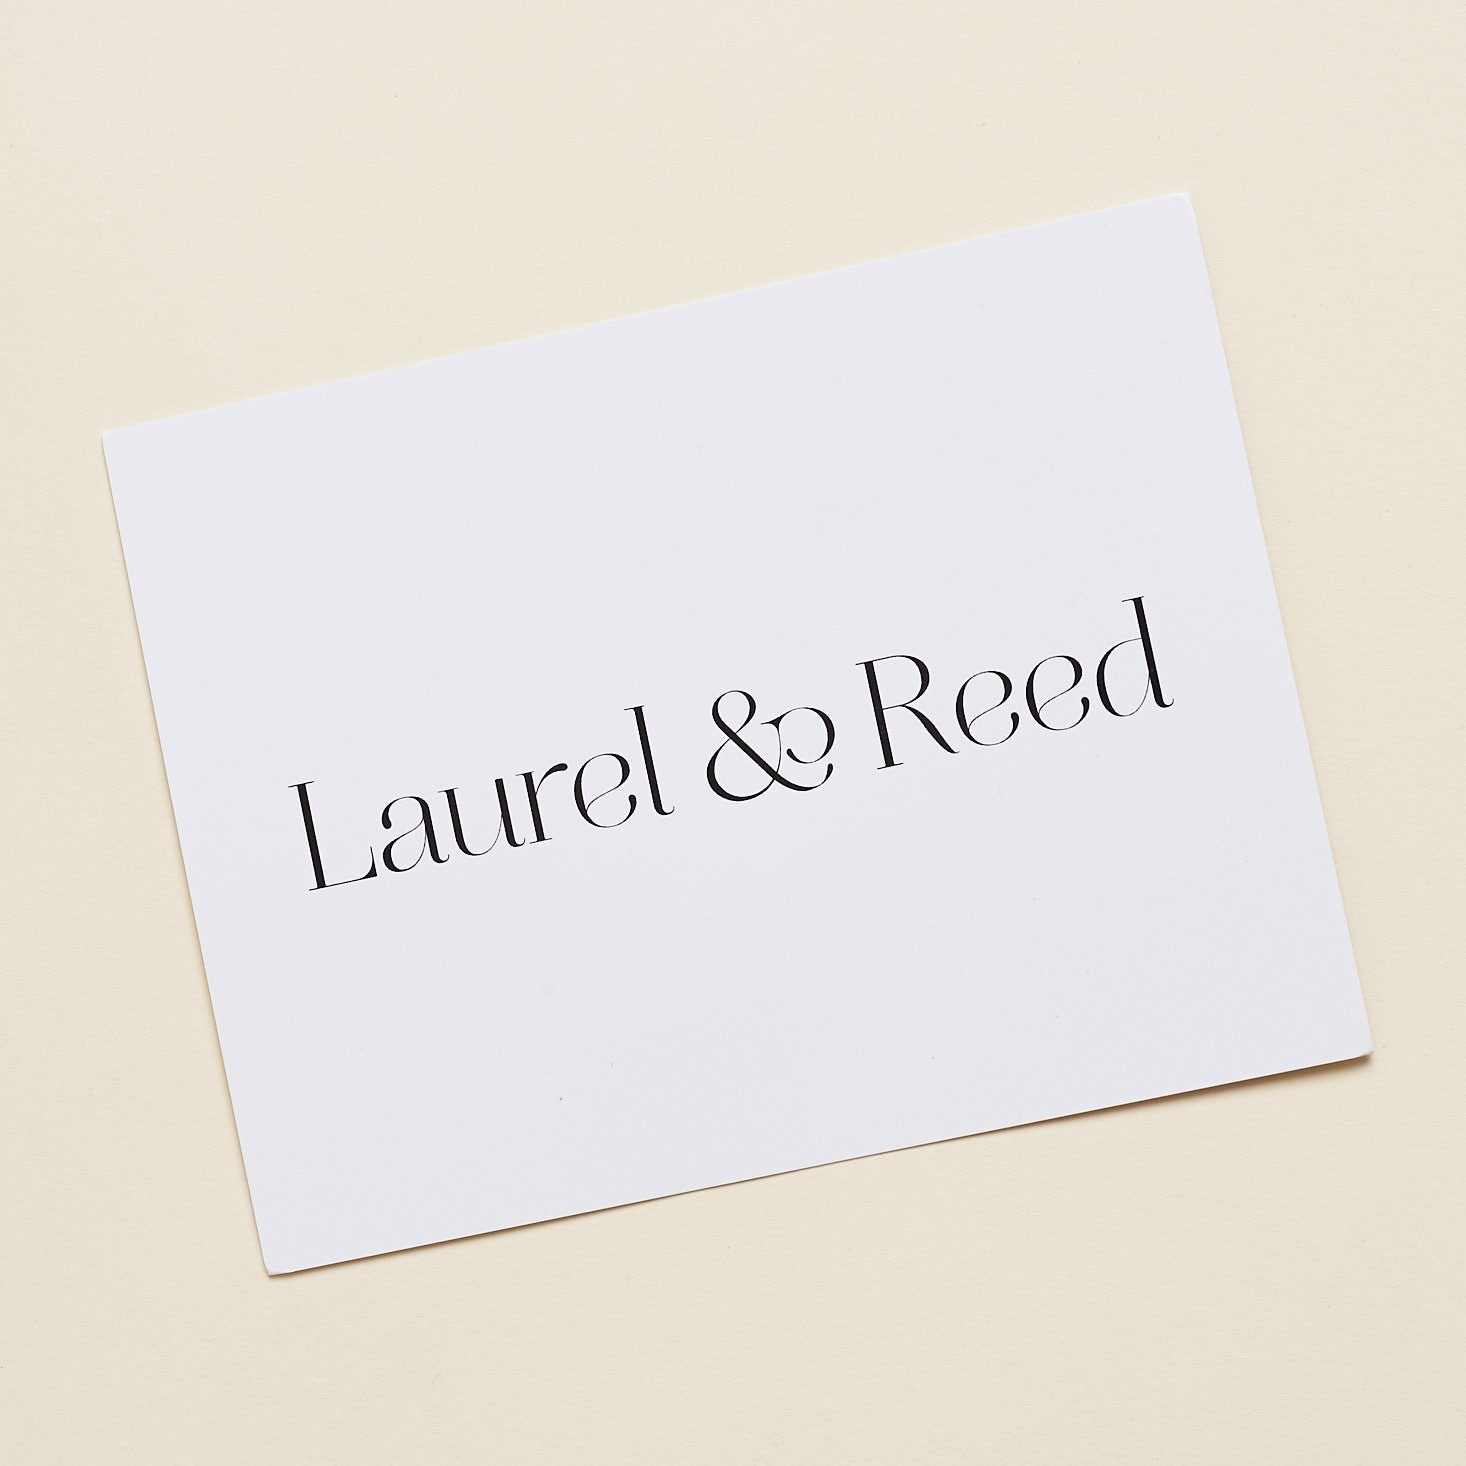 Laurel & Reed info card with company name on front